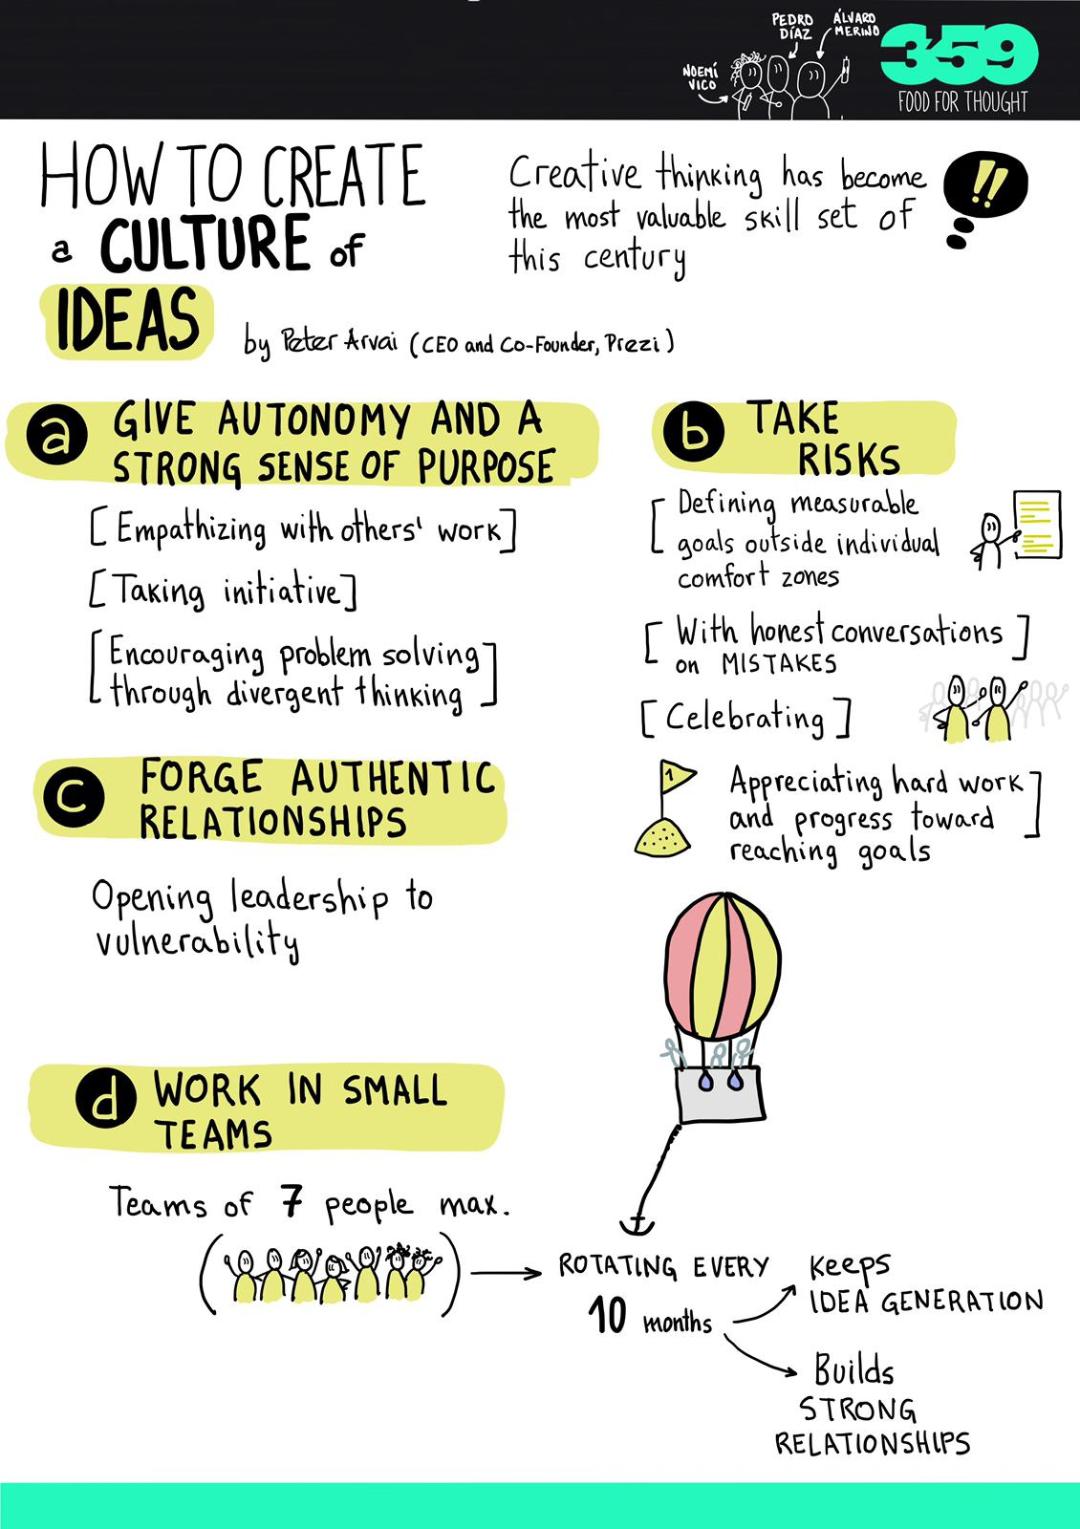 How to create a culture of ideas